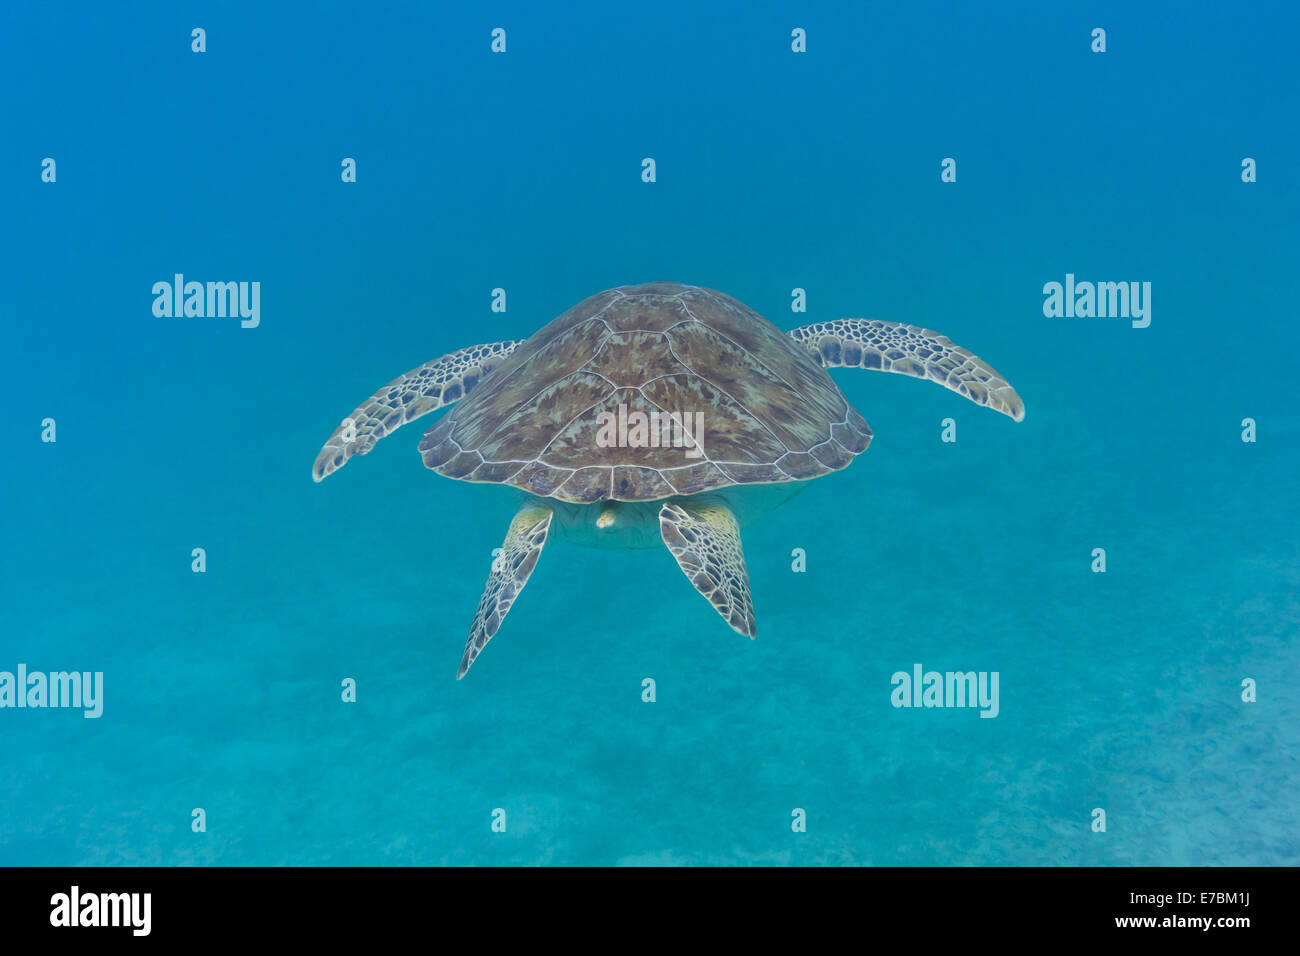 A green turtle swims away from the camera in the blue waters of the Caribbean Stock Photo